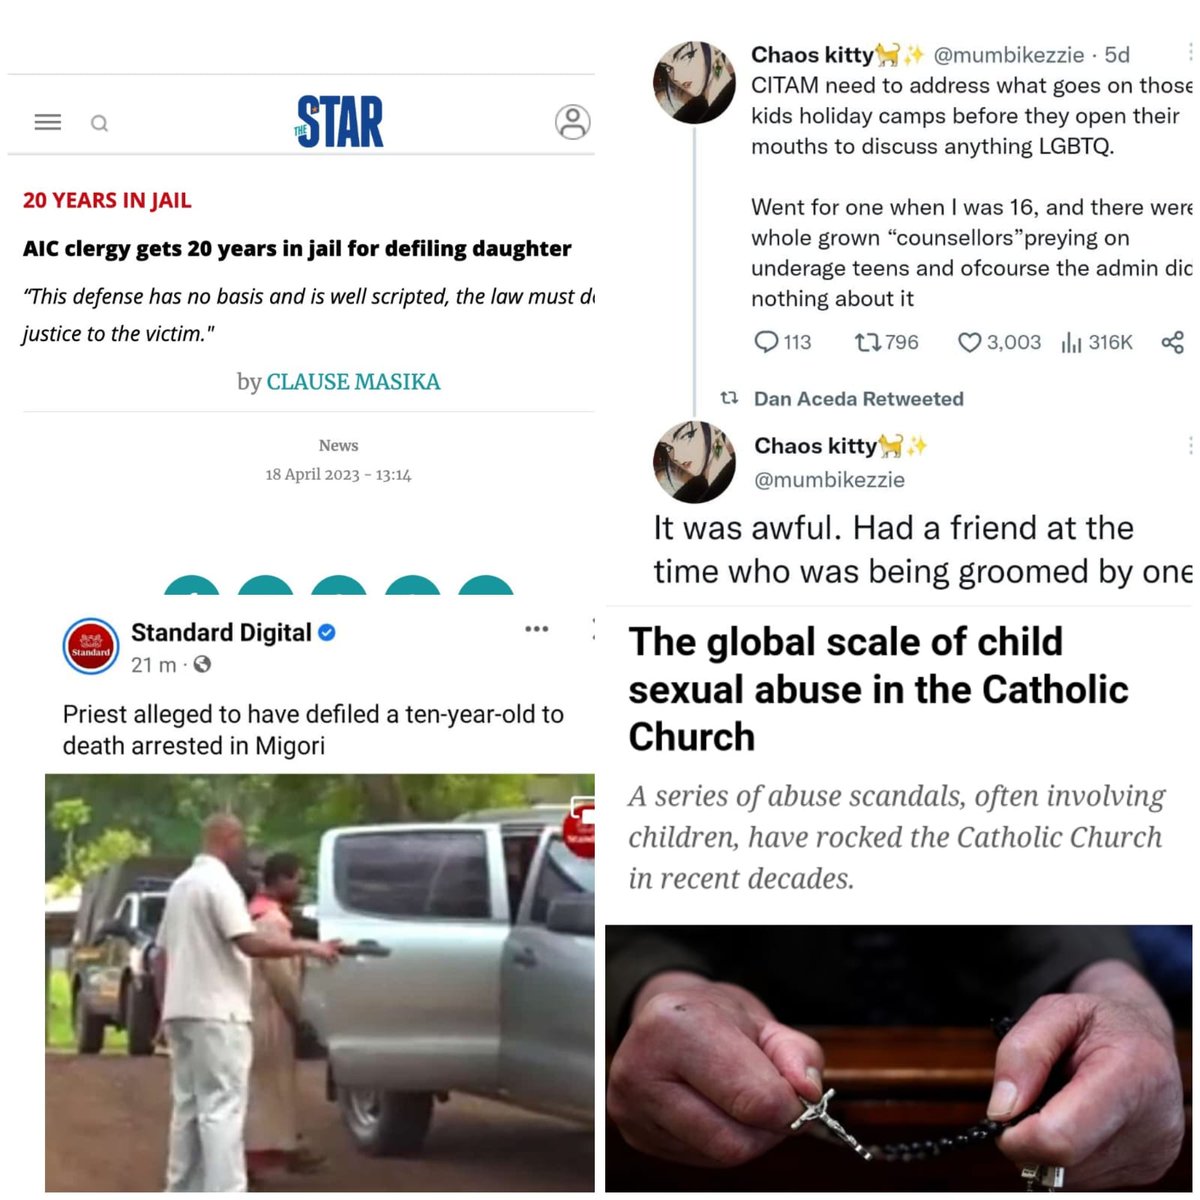 1. Girl drugged &raped by pastor who owns a housegirl bureau in ndenderu, July 2021;
2. Priest defiles 10yr old in Migori;
3. CITAM attendees open up on sexual preditators eyeing youthcamps;
4. AIC Clergy jailed for defiling daughter in April 2023. 
CHURCH MUST BE REGULATED!